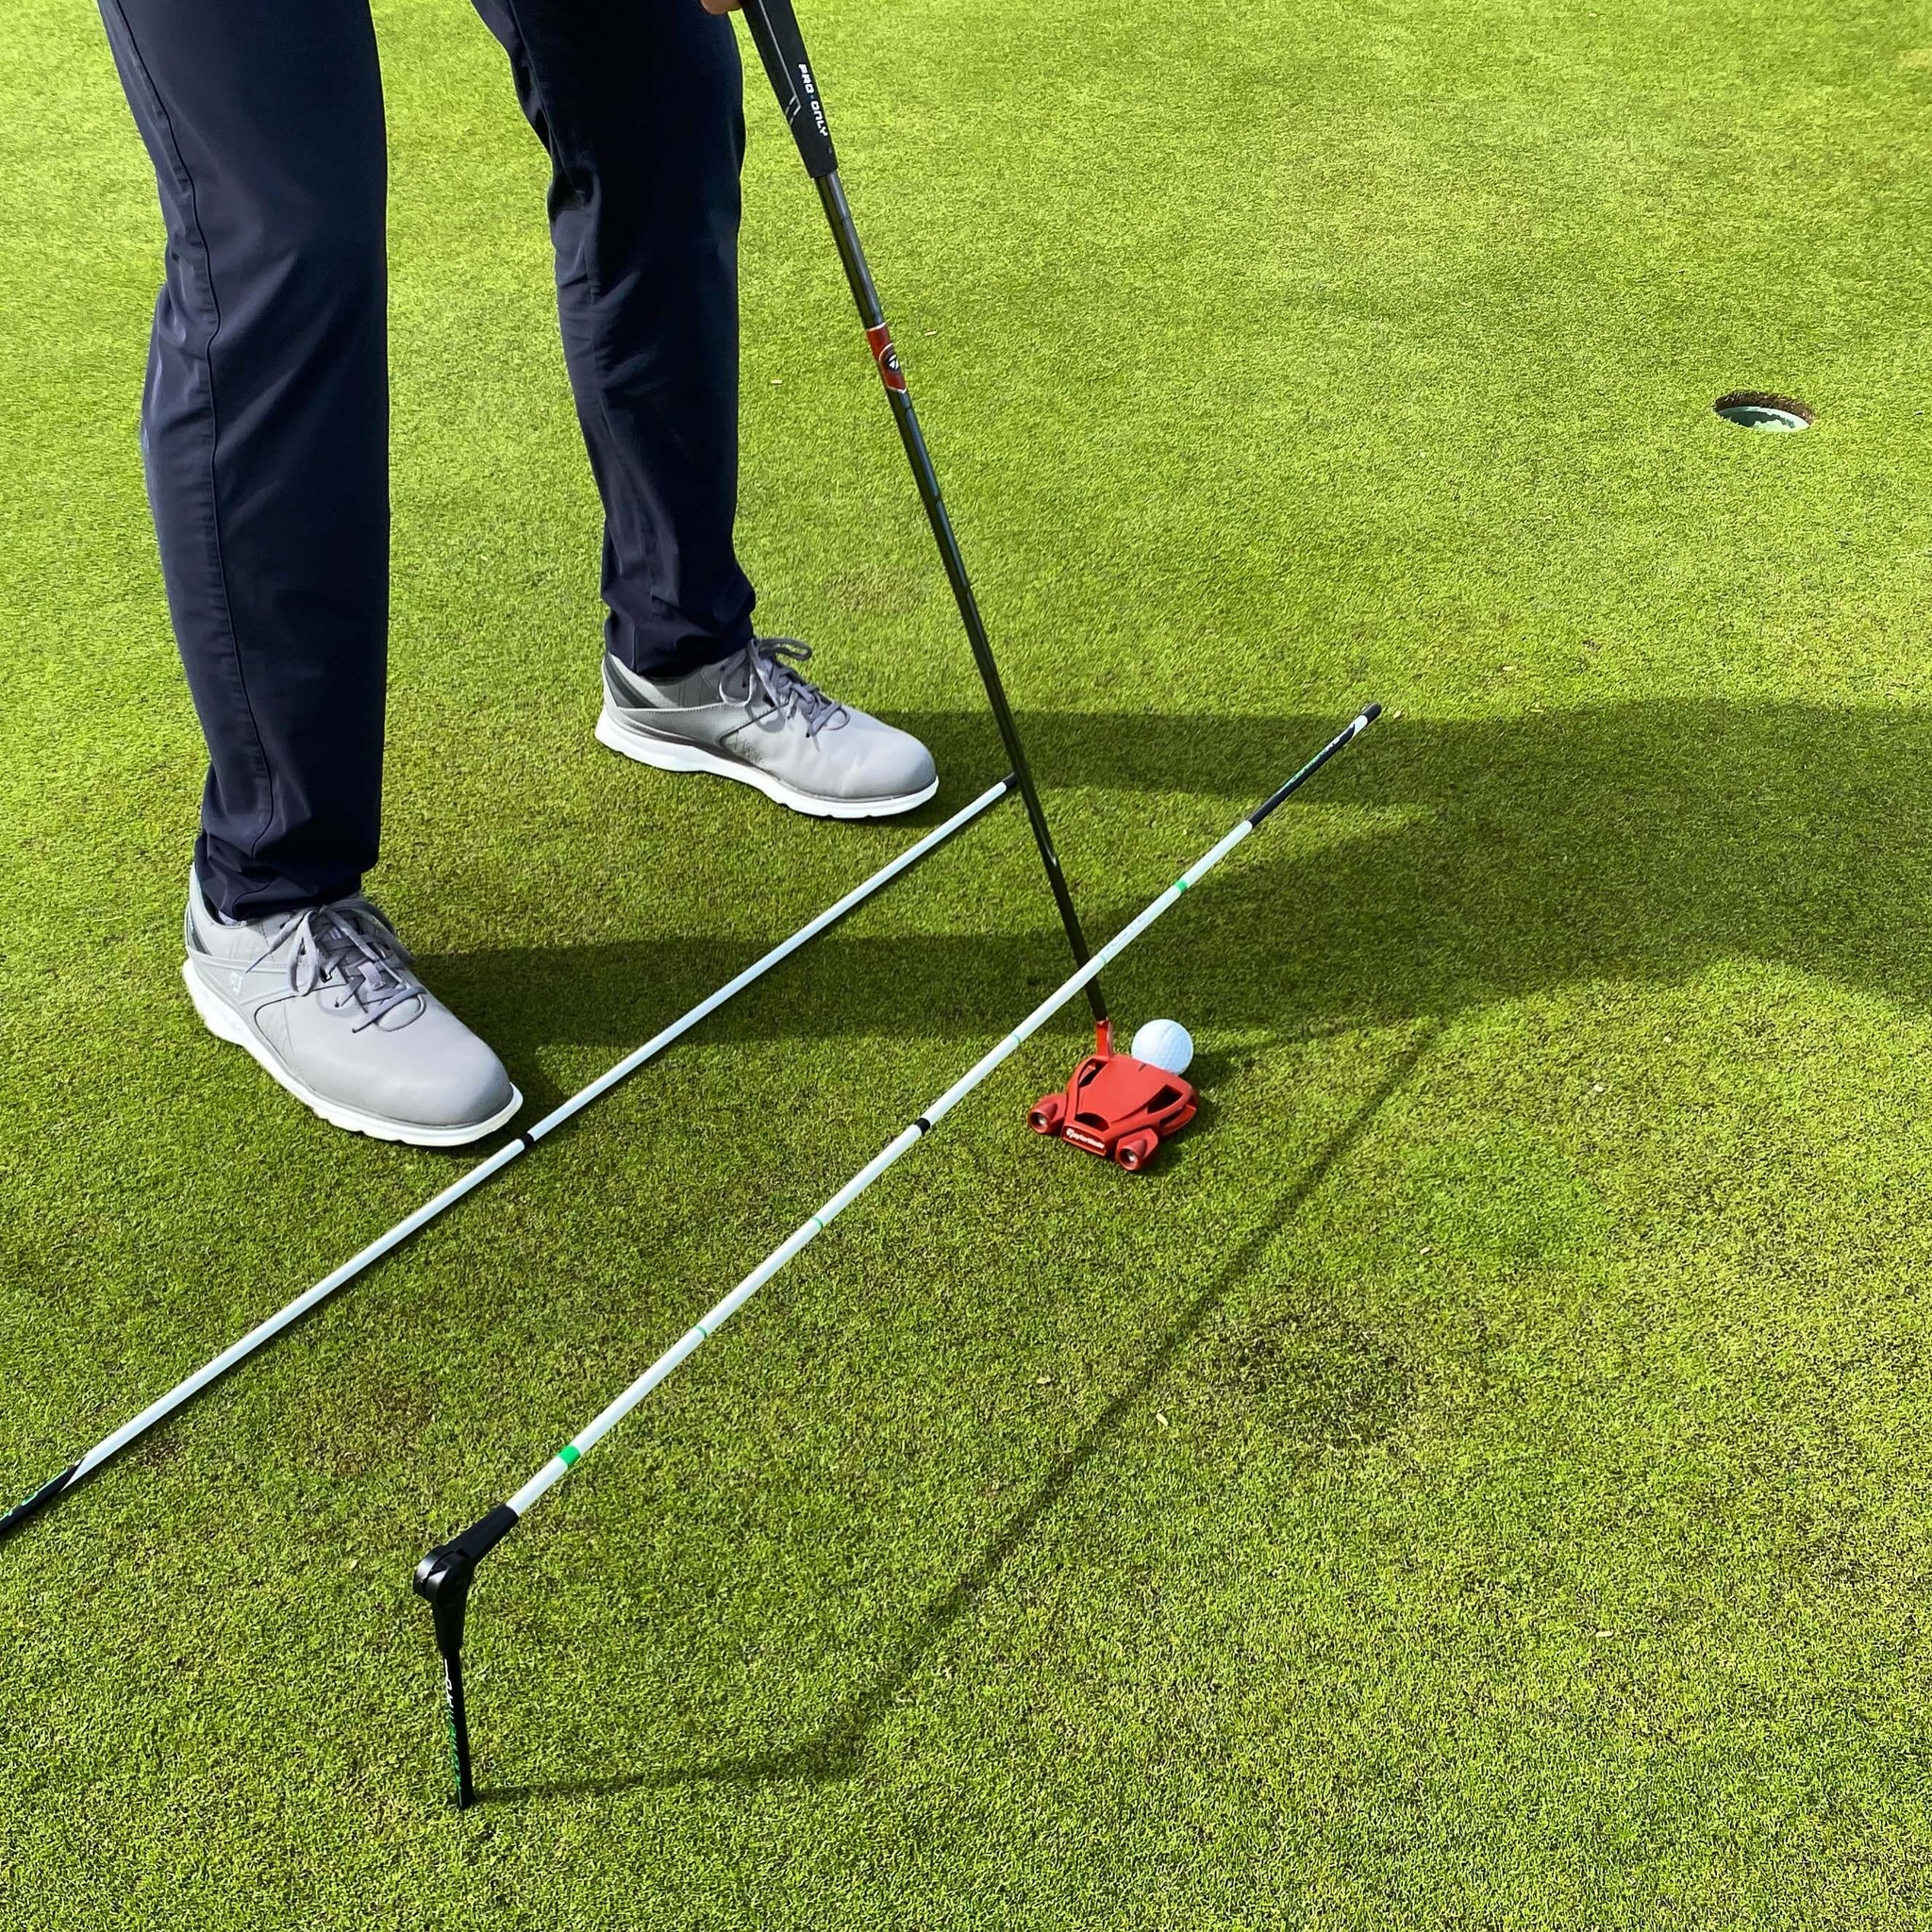 golf putting aid for long irons, wedge play, putting and driving the golf ball. Alignment is one of the key fundamentals in golf. buy a single hinge alignment hinge with a straight alignment stick for a powerful multi use golf training aid